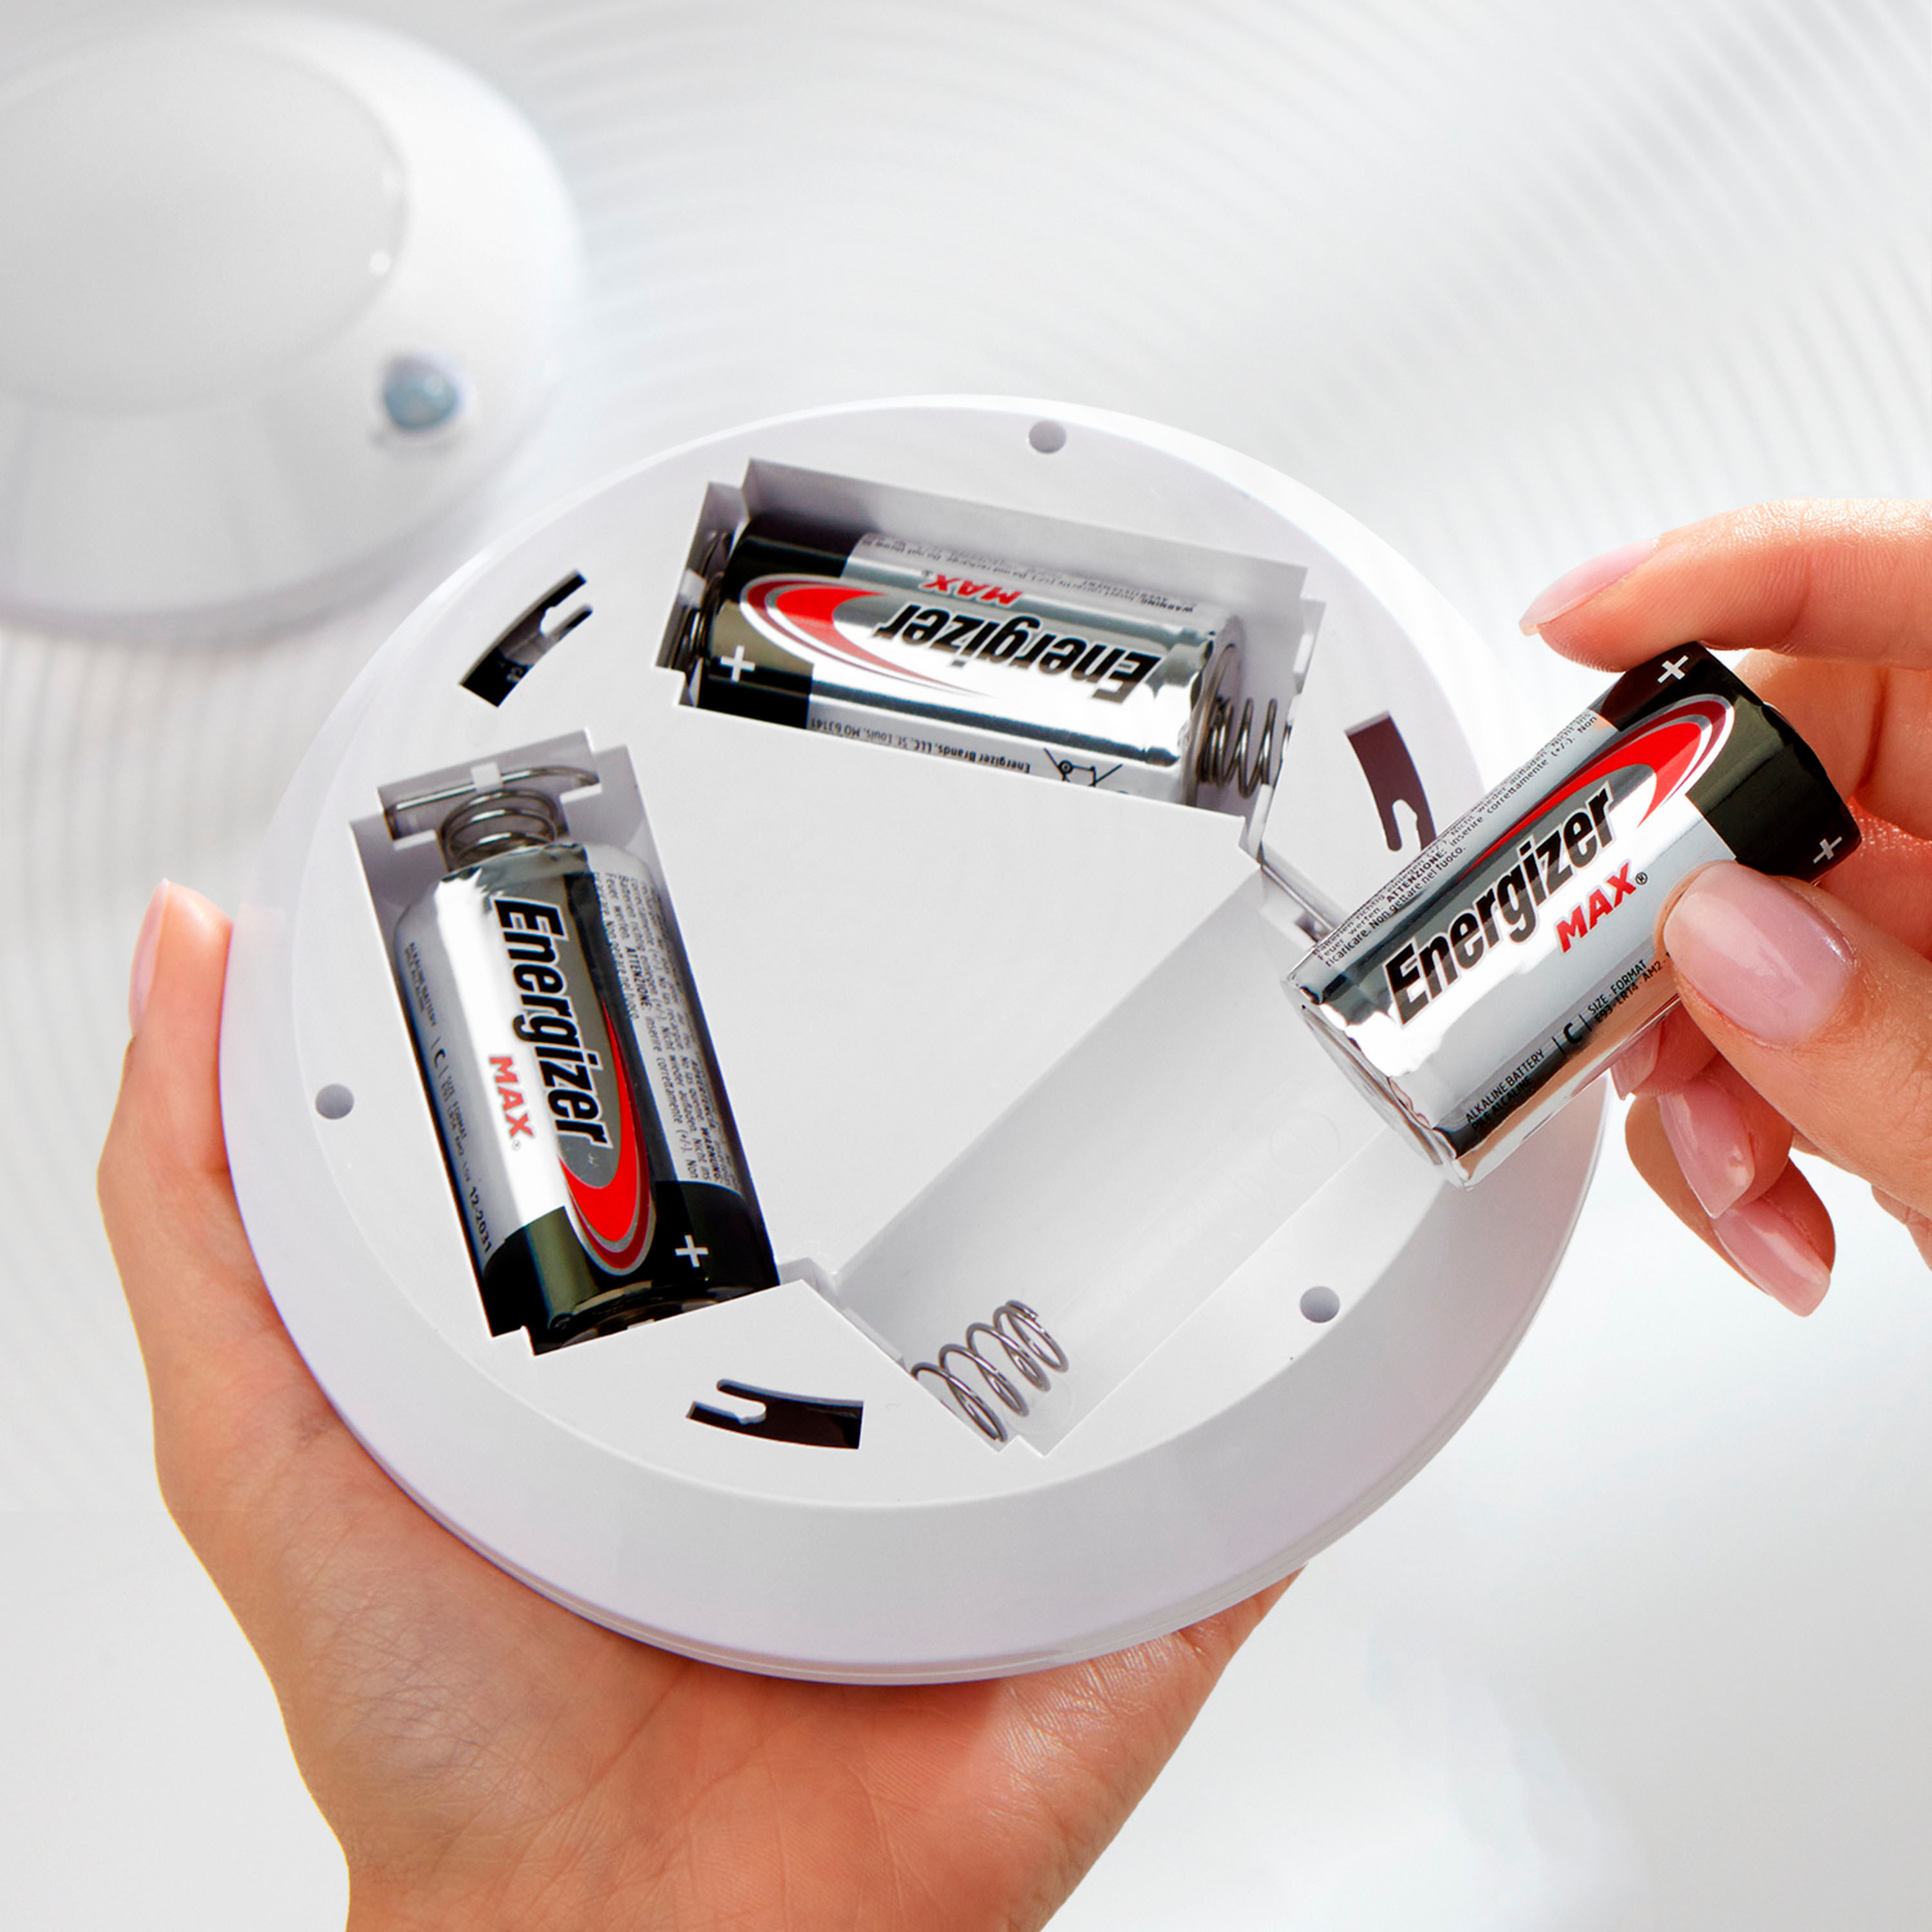 Energizer MAX D Cell Batteries